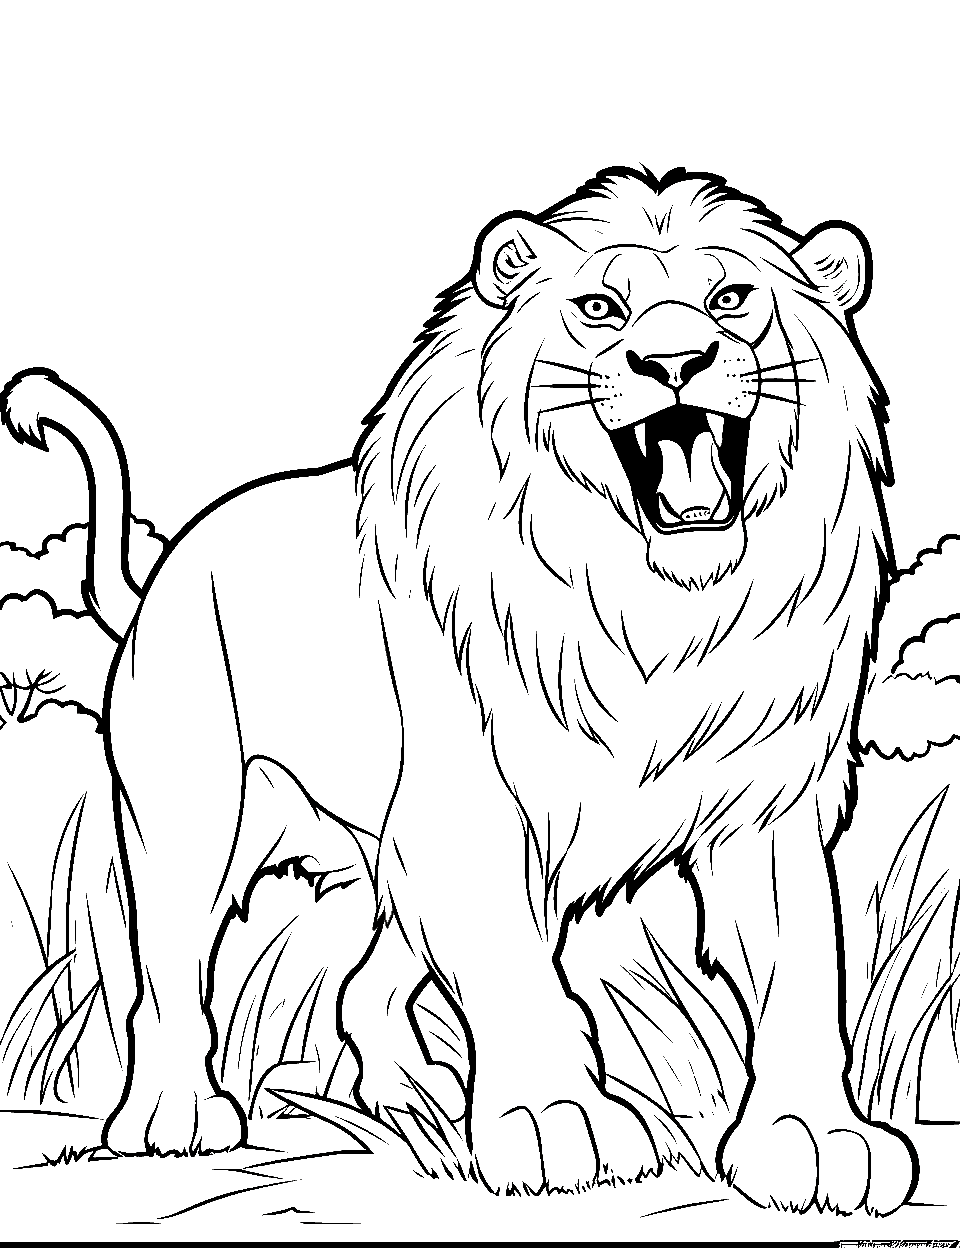 Wild Lion Roar Coloring Page - A lion roaring mightily amidst the African savannah.